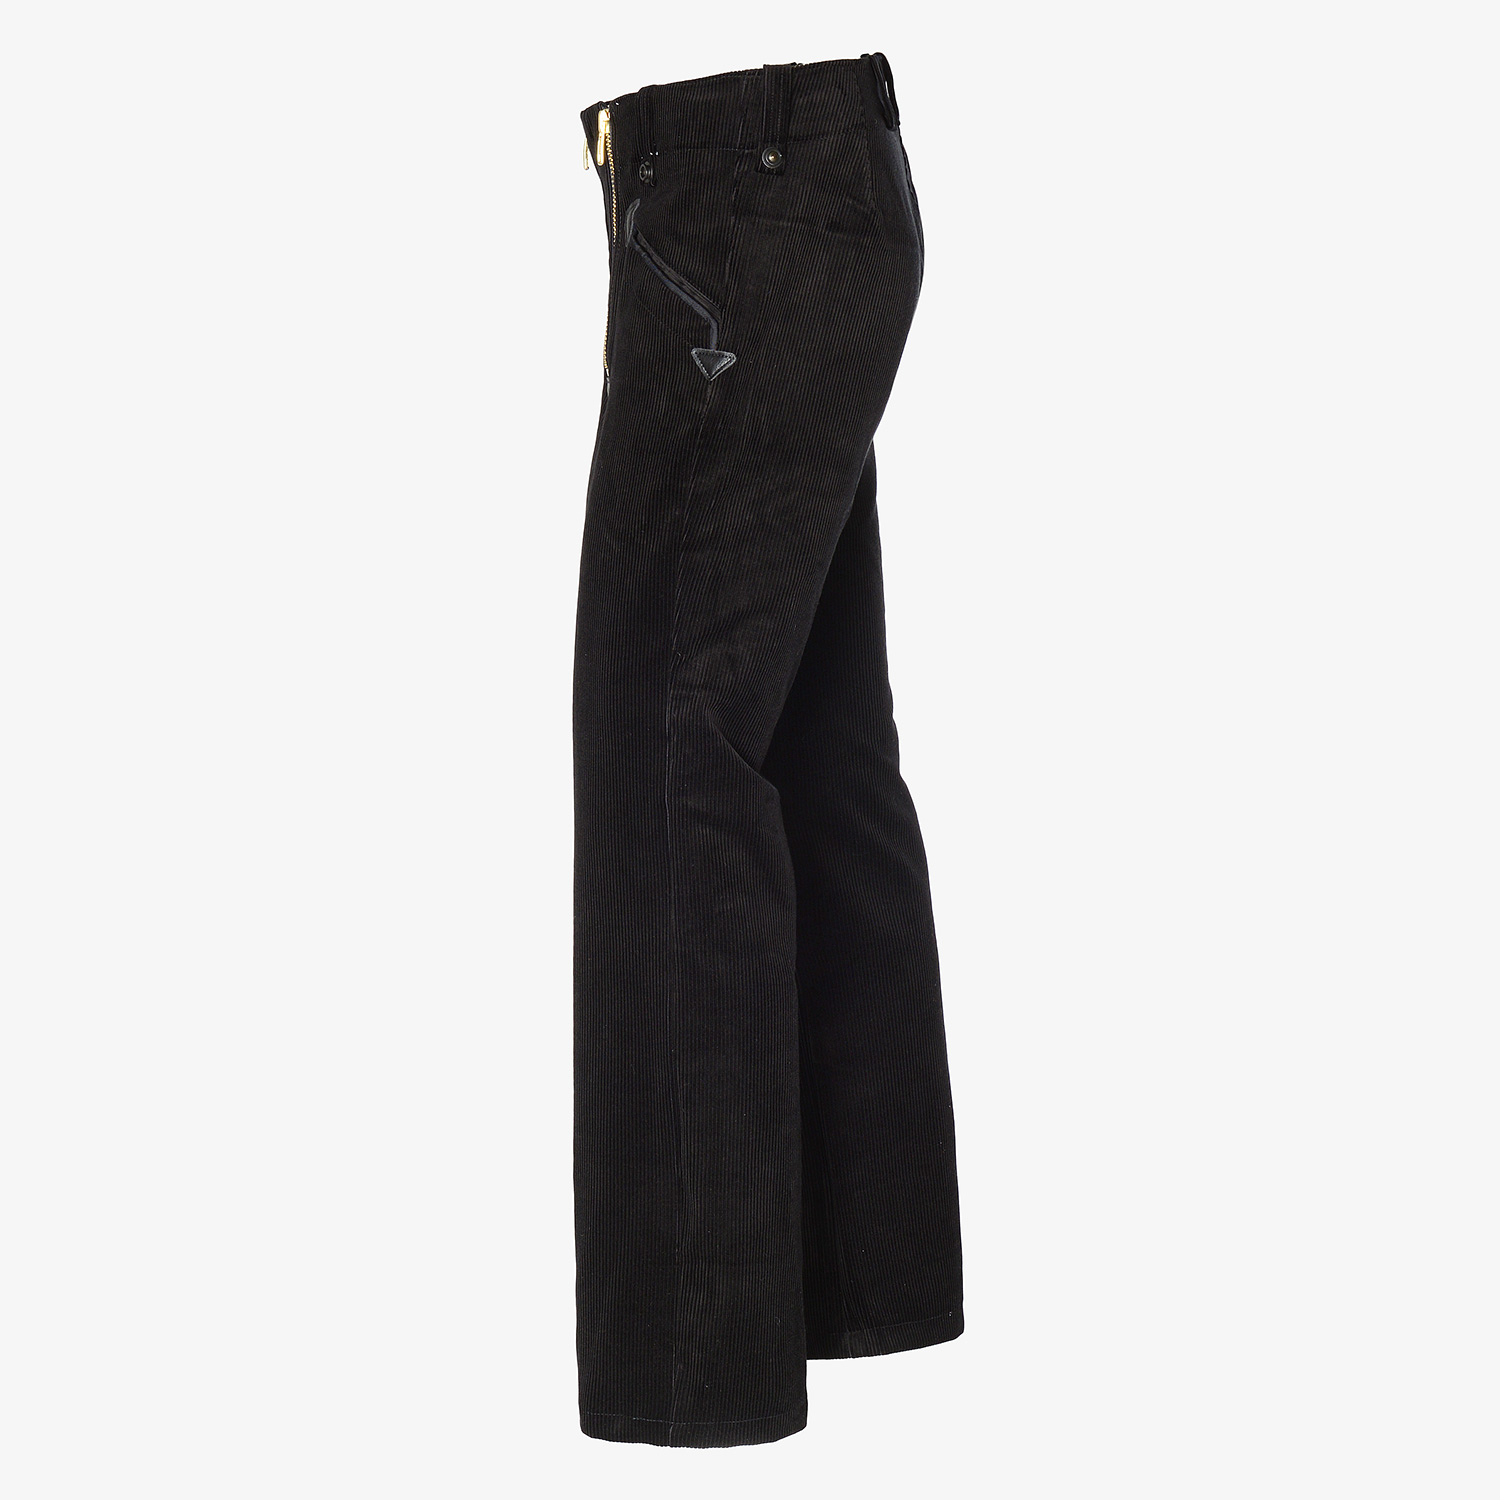 HANS guild trousers corduroy stretch without bell bottom